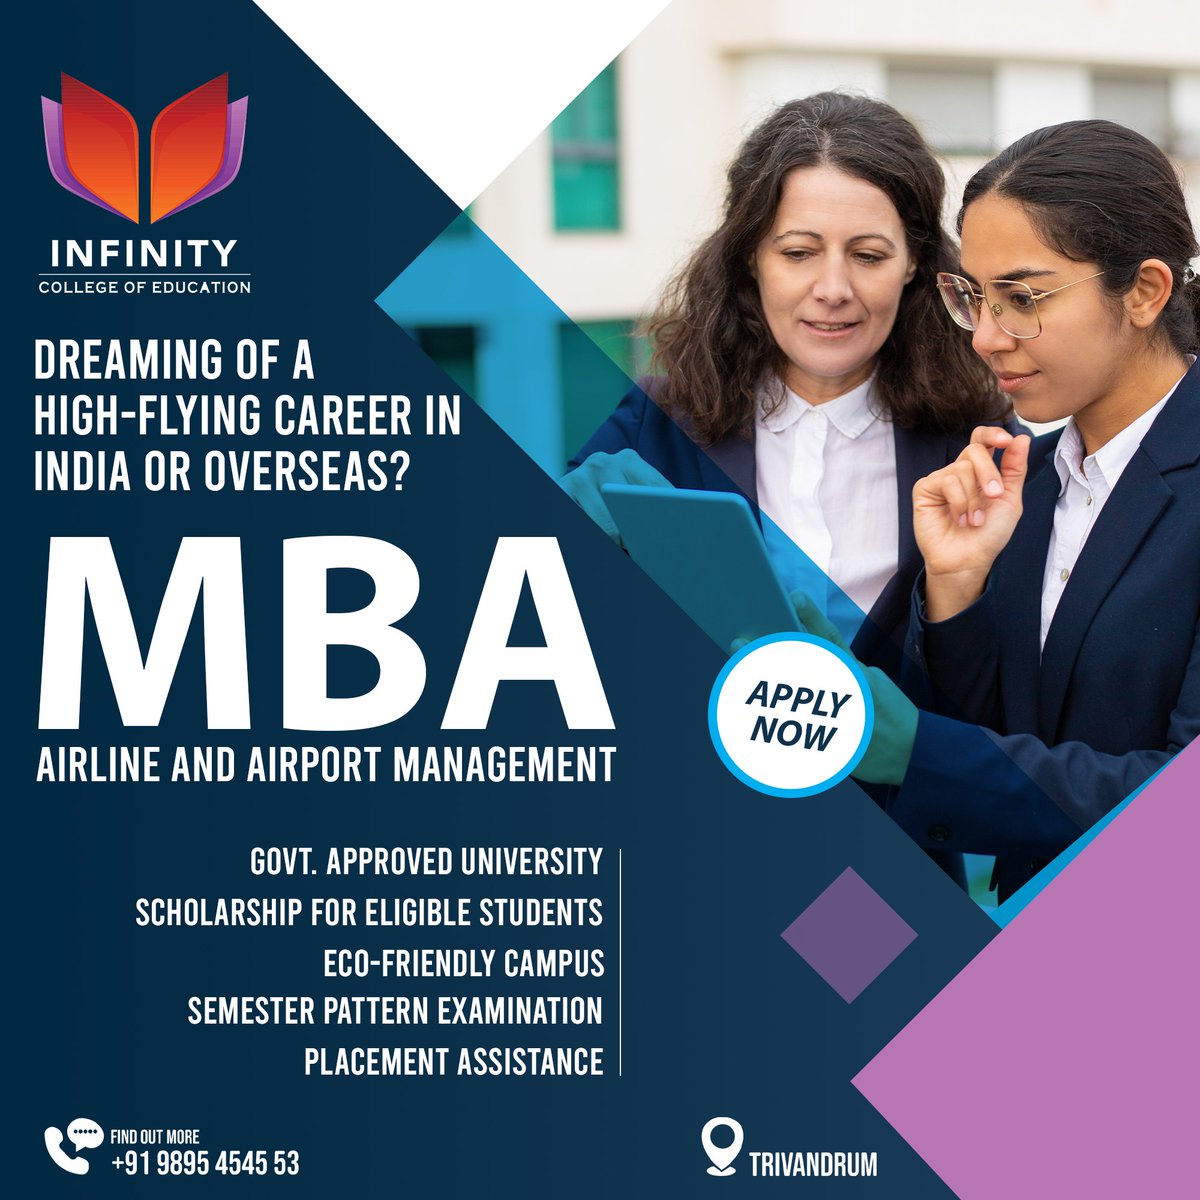 Unlock the doors to high-flying opportunities! Infinity College of Education invites you to explore our MBA in Airline and Airport Management.  
For Details Contact: +91 98954 54553
WhatsApp link : wa.link/dk1kl9

#aviationadmission #mbaadmission2024 #mbaaviation